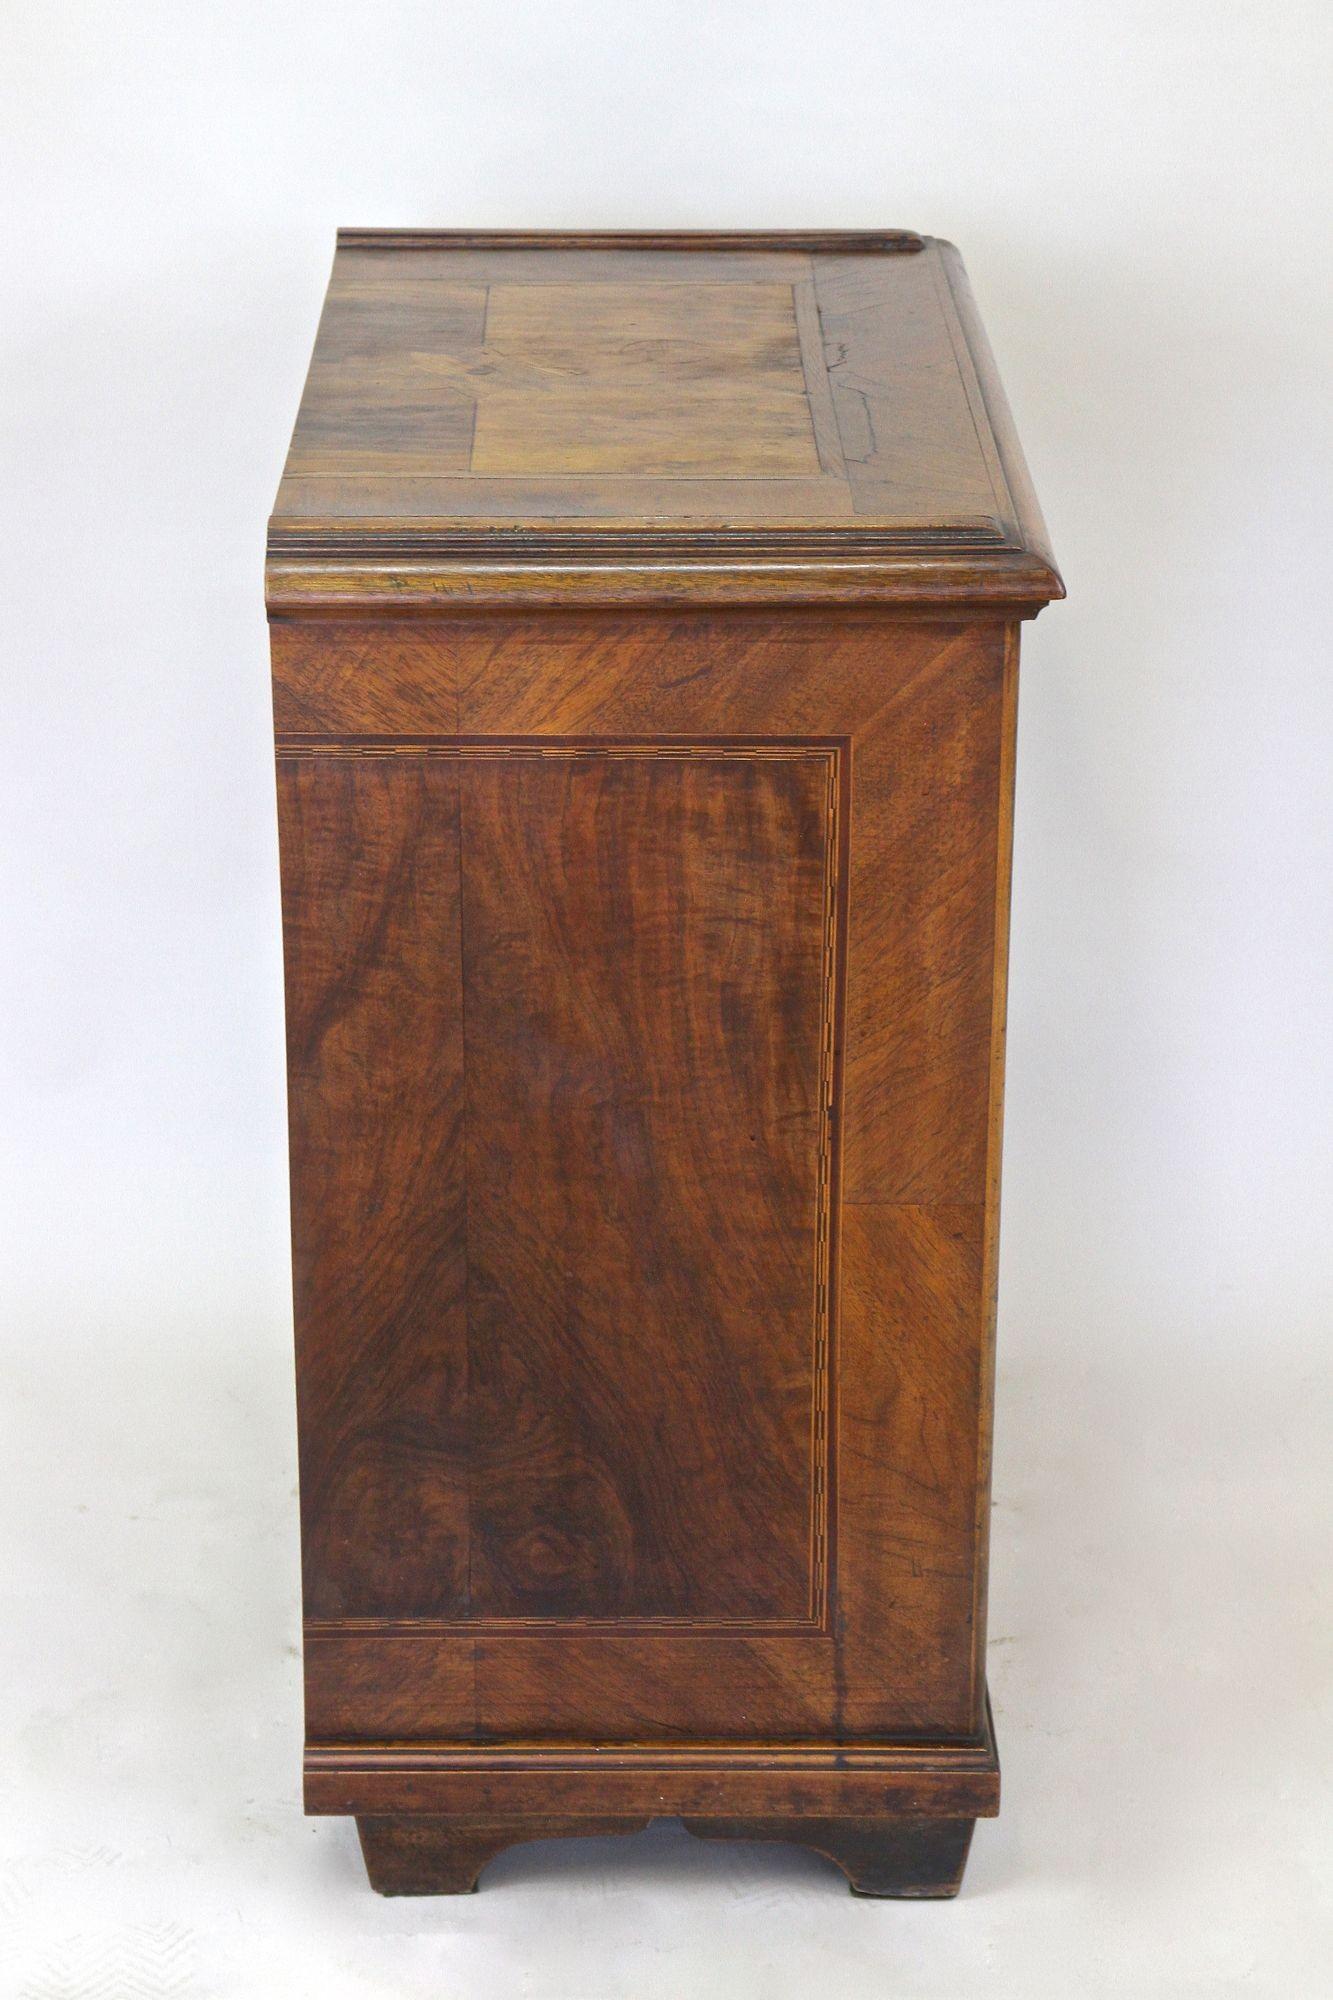 19th Century Biedermeier Nutwood Chest Of Drawers With Micro-Inlays, AT ca. 1850 For Sale 12